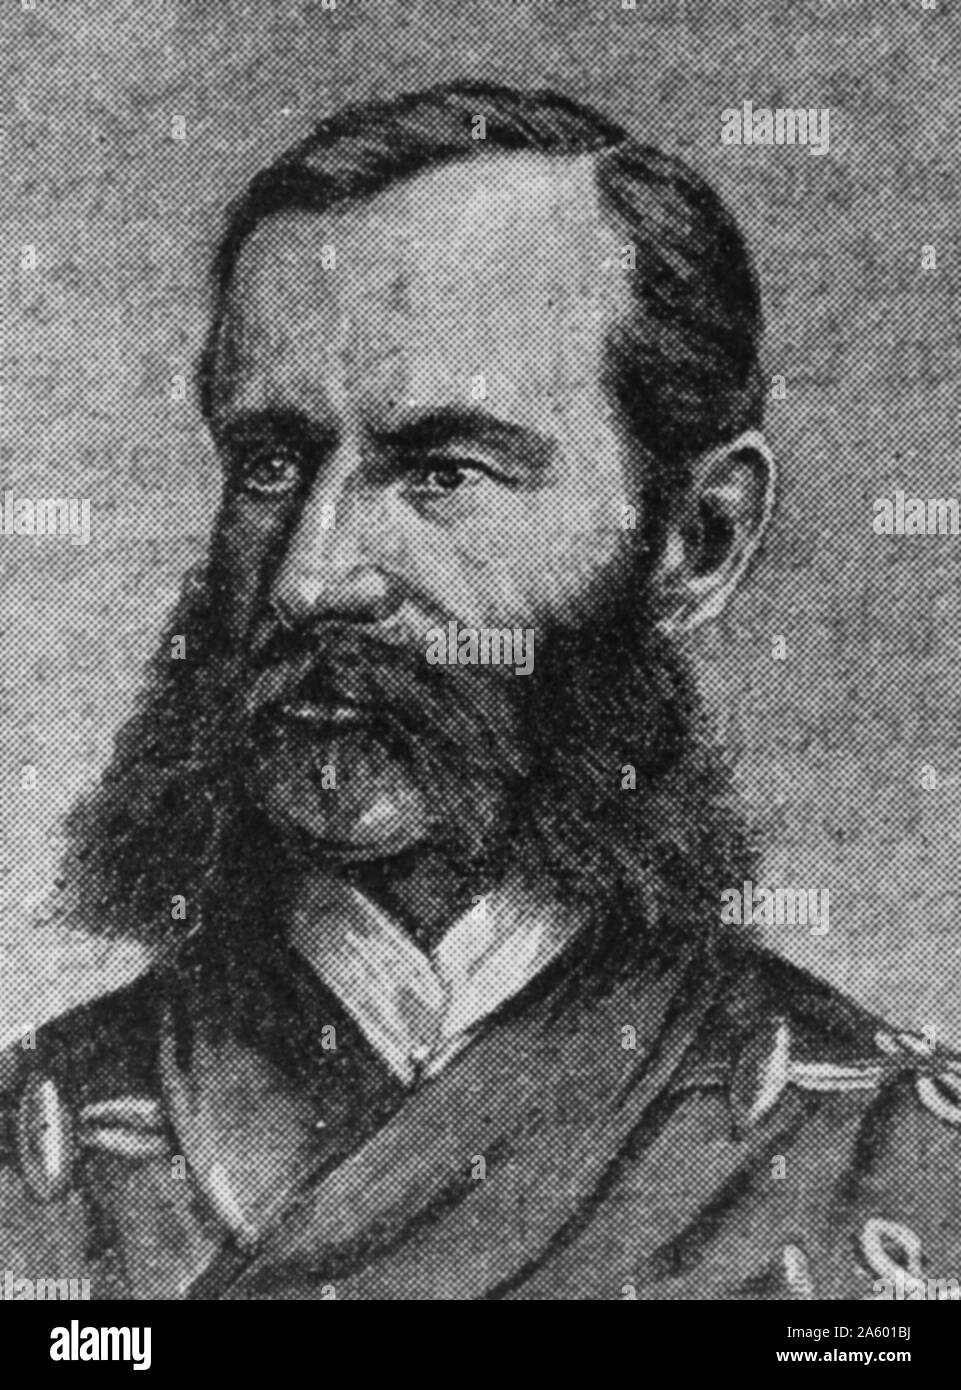 Field Marshal, Frederick Sleigh Roberts, Earl Roberts, (1832 – 14 November 1914). British soldier. He served in the Indian rebellion, the Expedition to Abyssinia and the Second Anglo-Afghan War before leading British Forces to success in the Second Boer War. Stock Photo